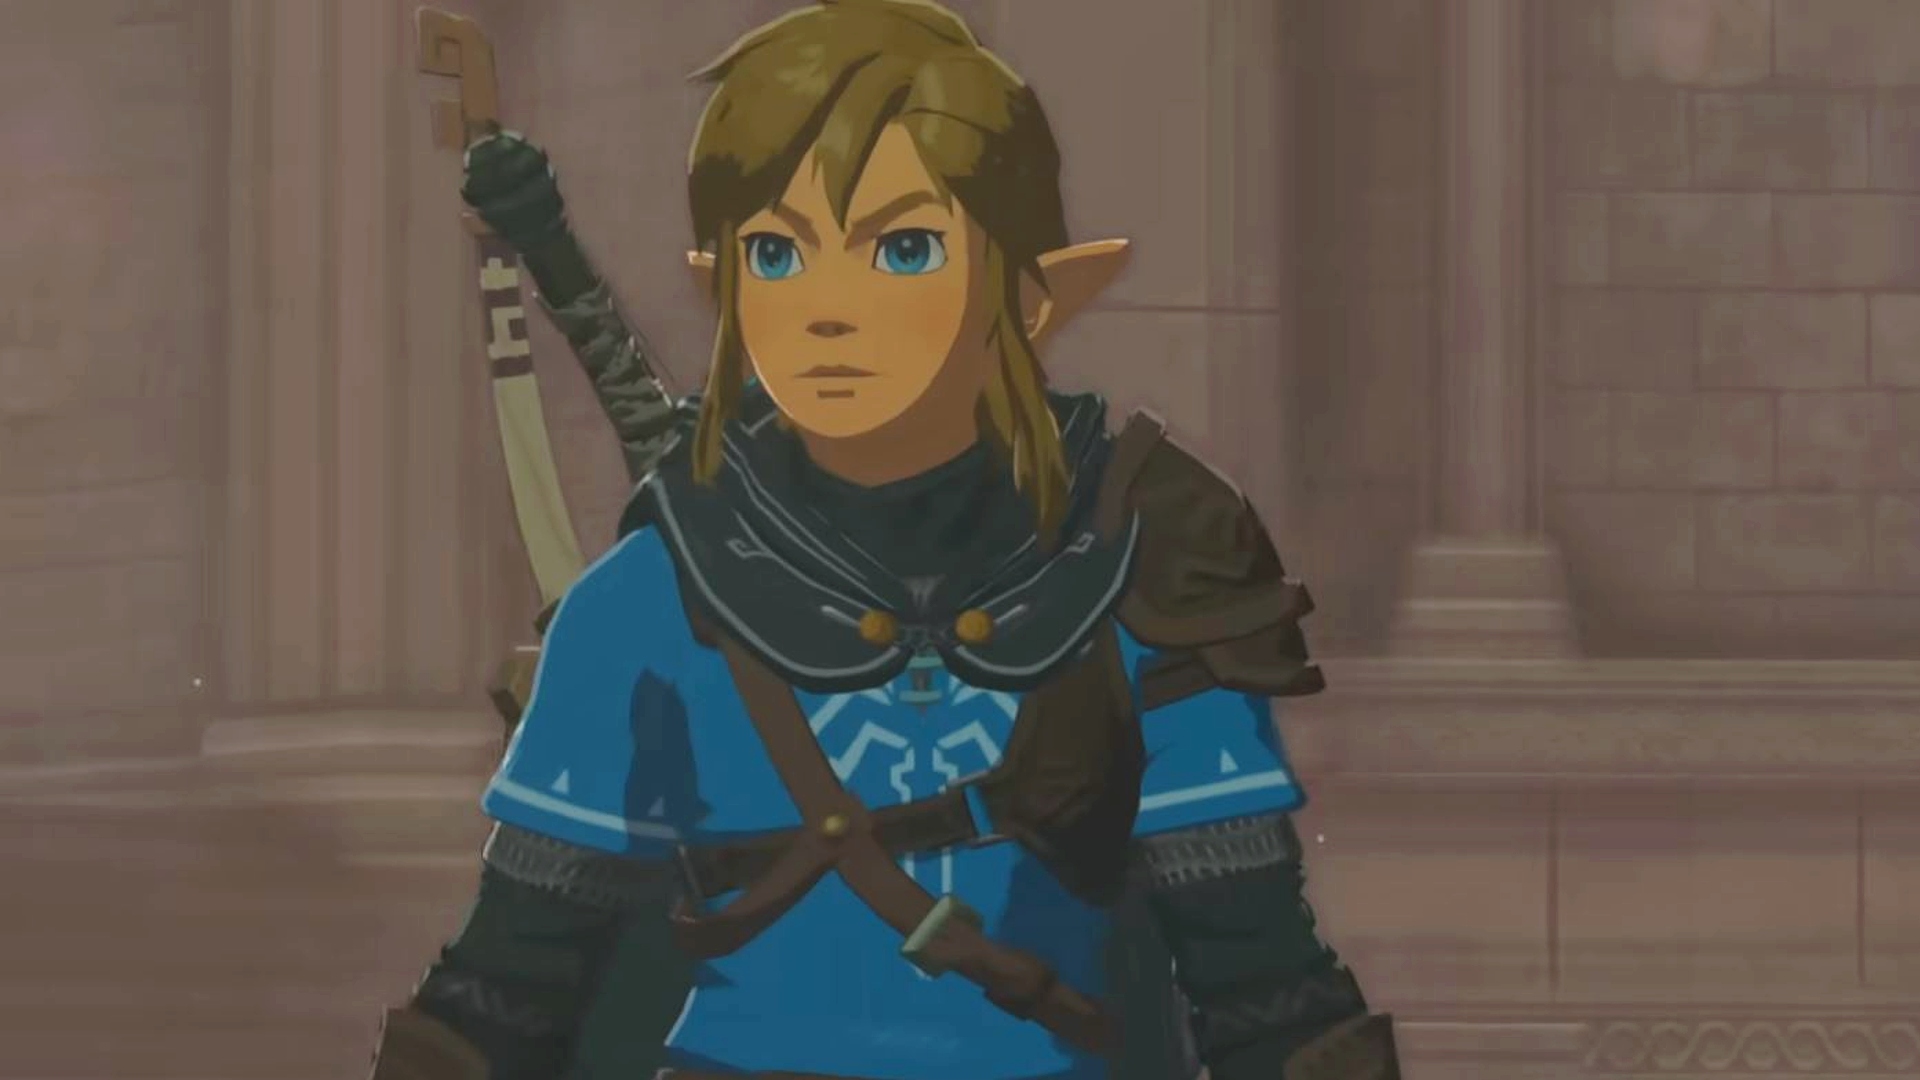 Breath Of The Wild' Has Been Confirmed To Be At The End Of The 'Zelda'  Timeline